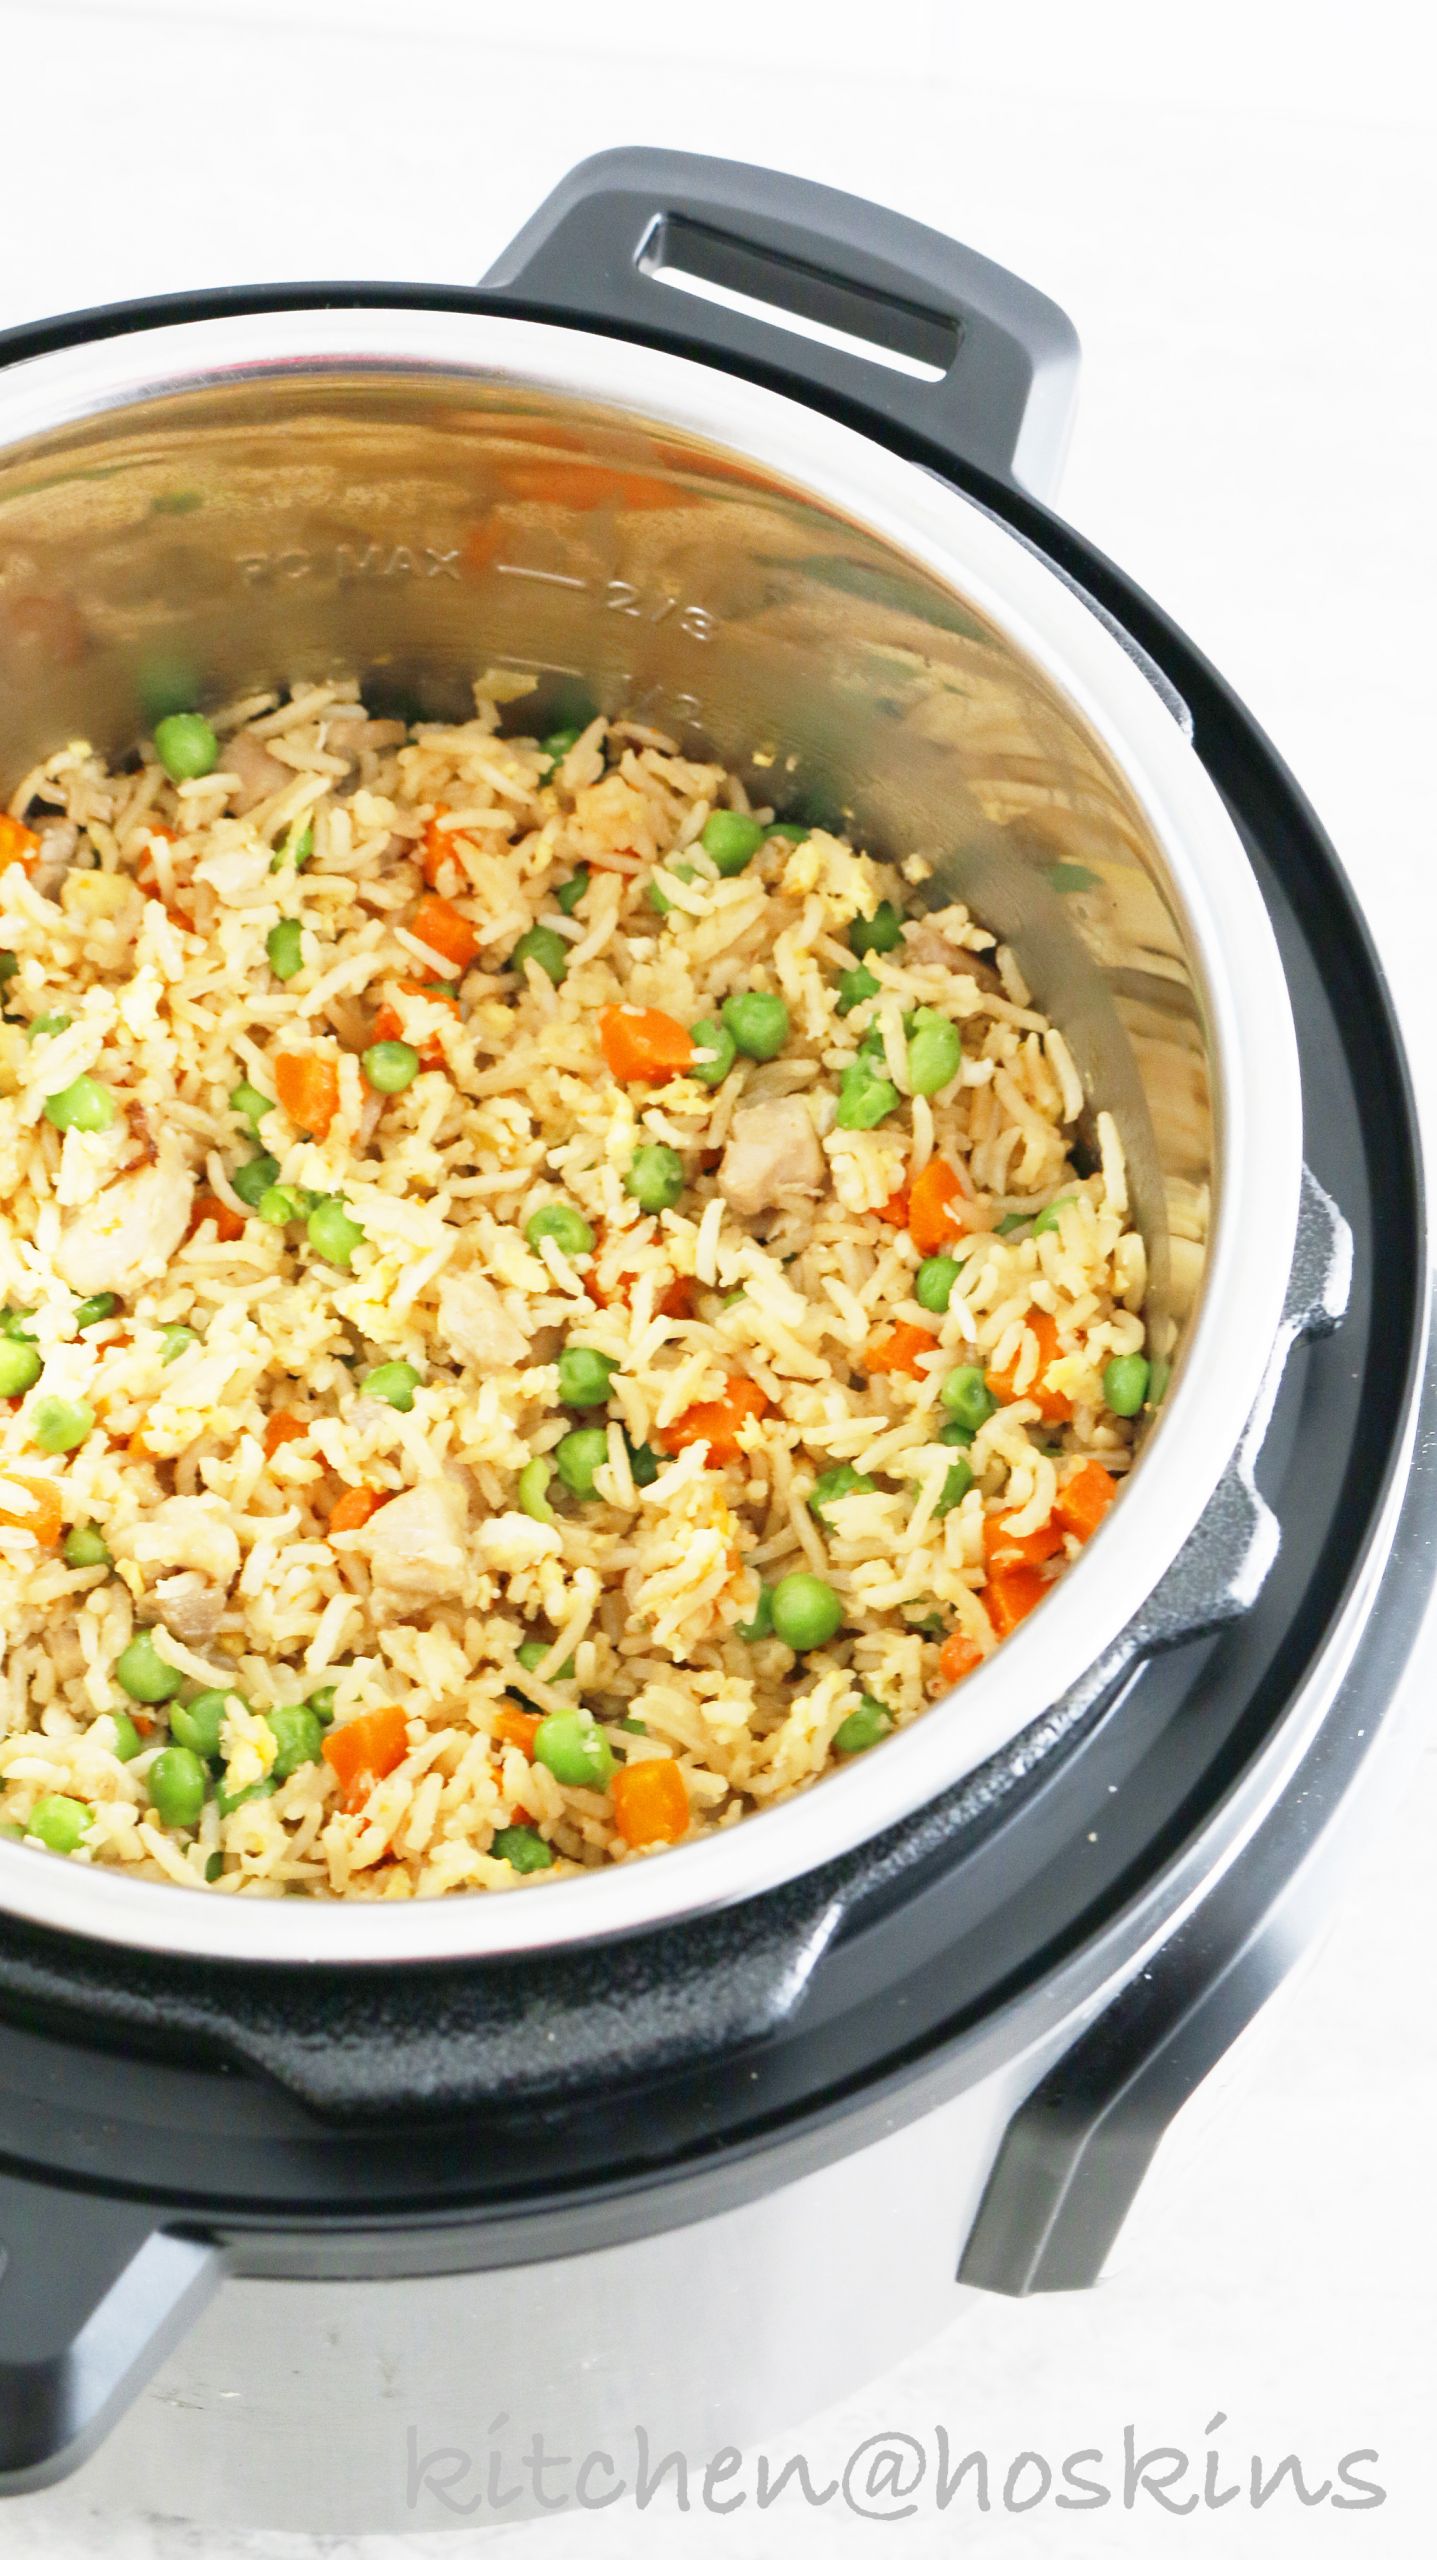 Instant Pot Chicken And Rice Recipes
 Instant Pot Chicken Fried Rice Kitchen Hoskins